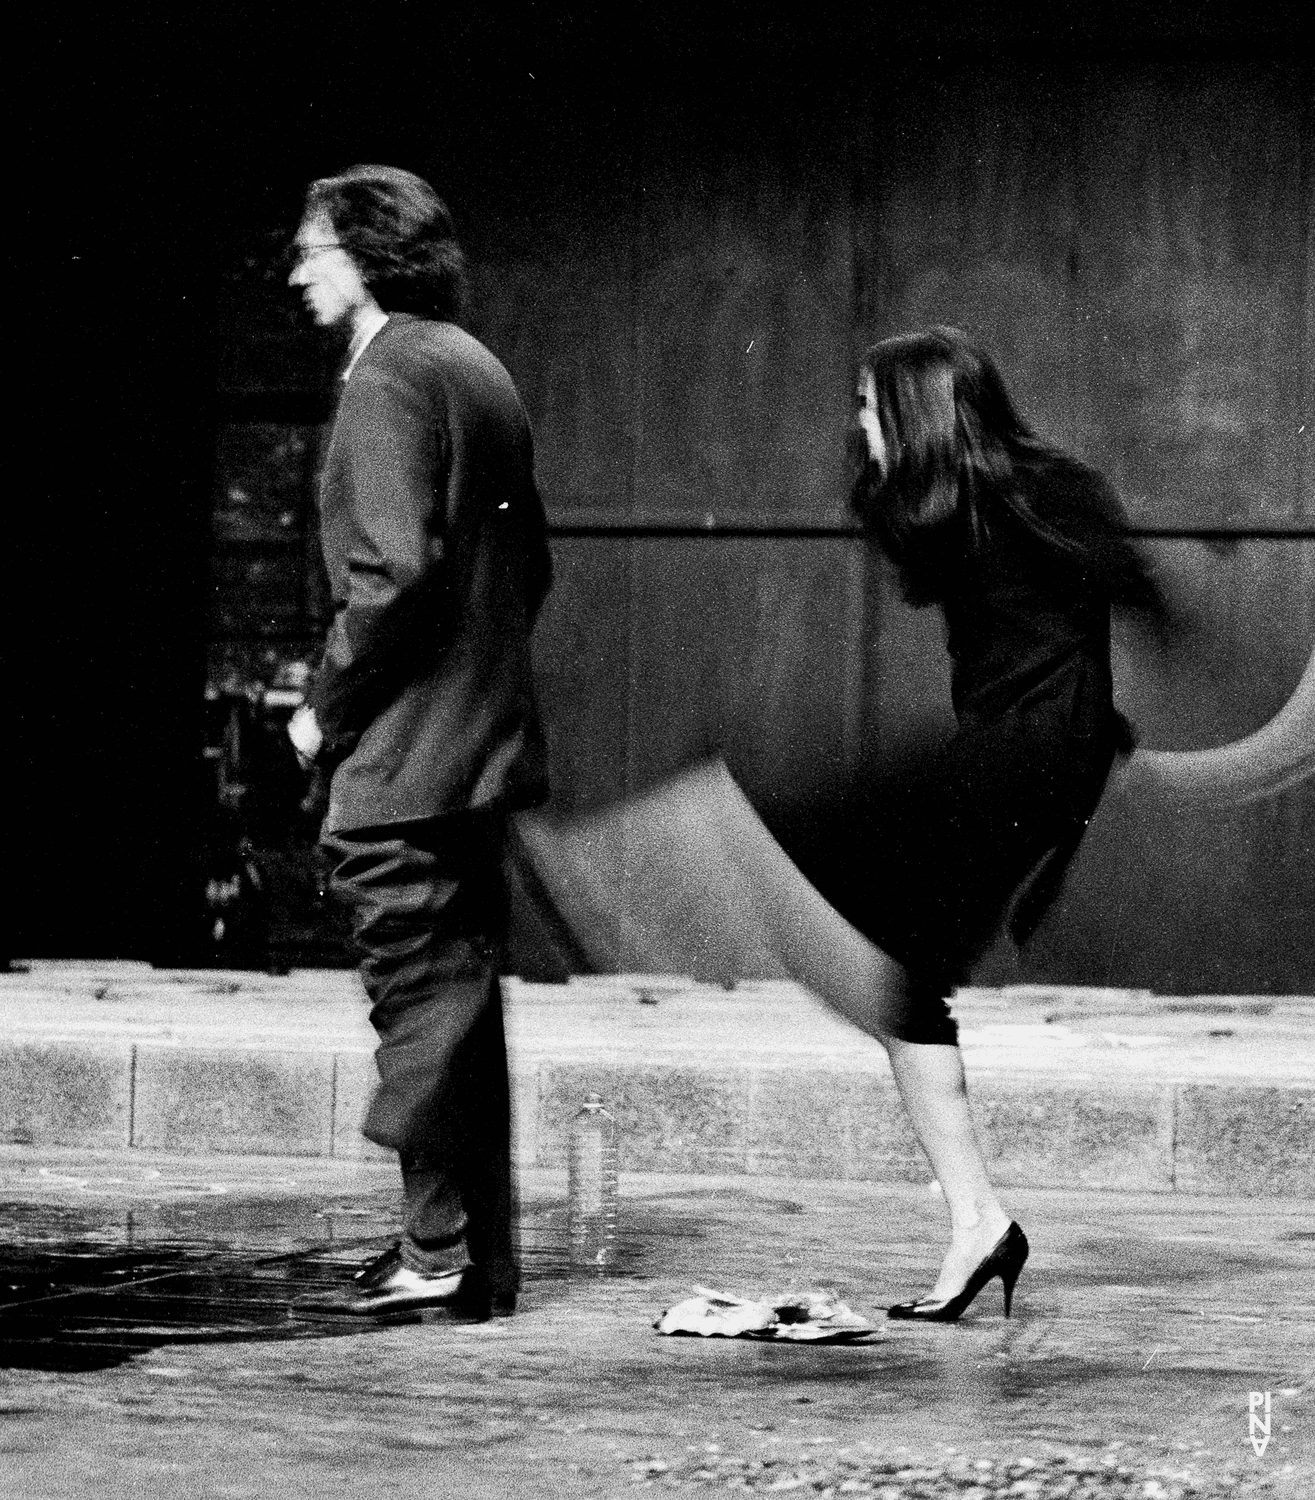 Jean Laurent Sasportes and Ruth Amarante in “Palermo Palermo” by Pina Bausch